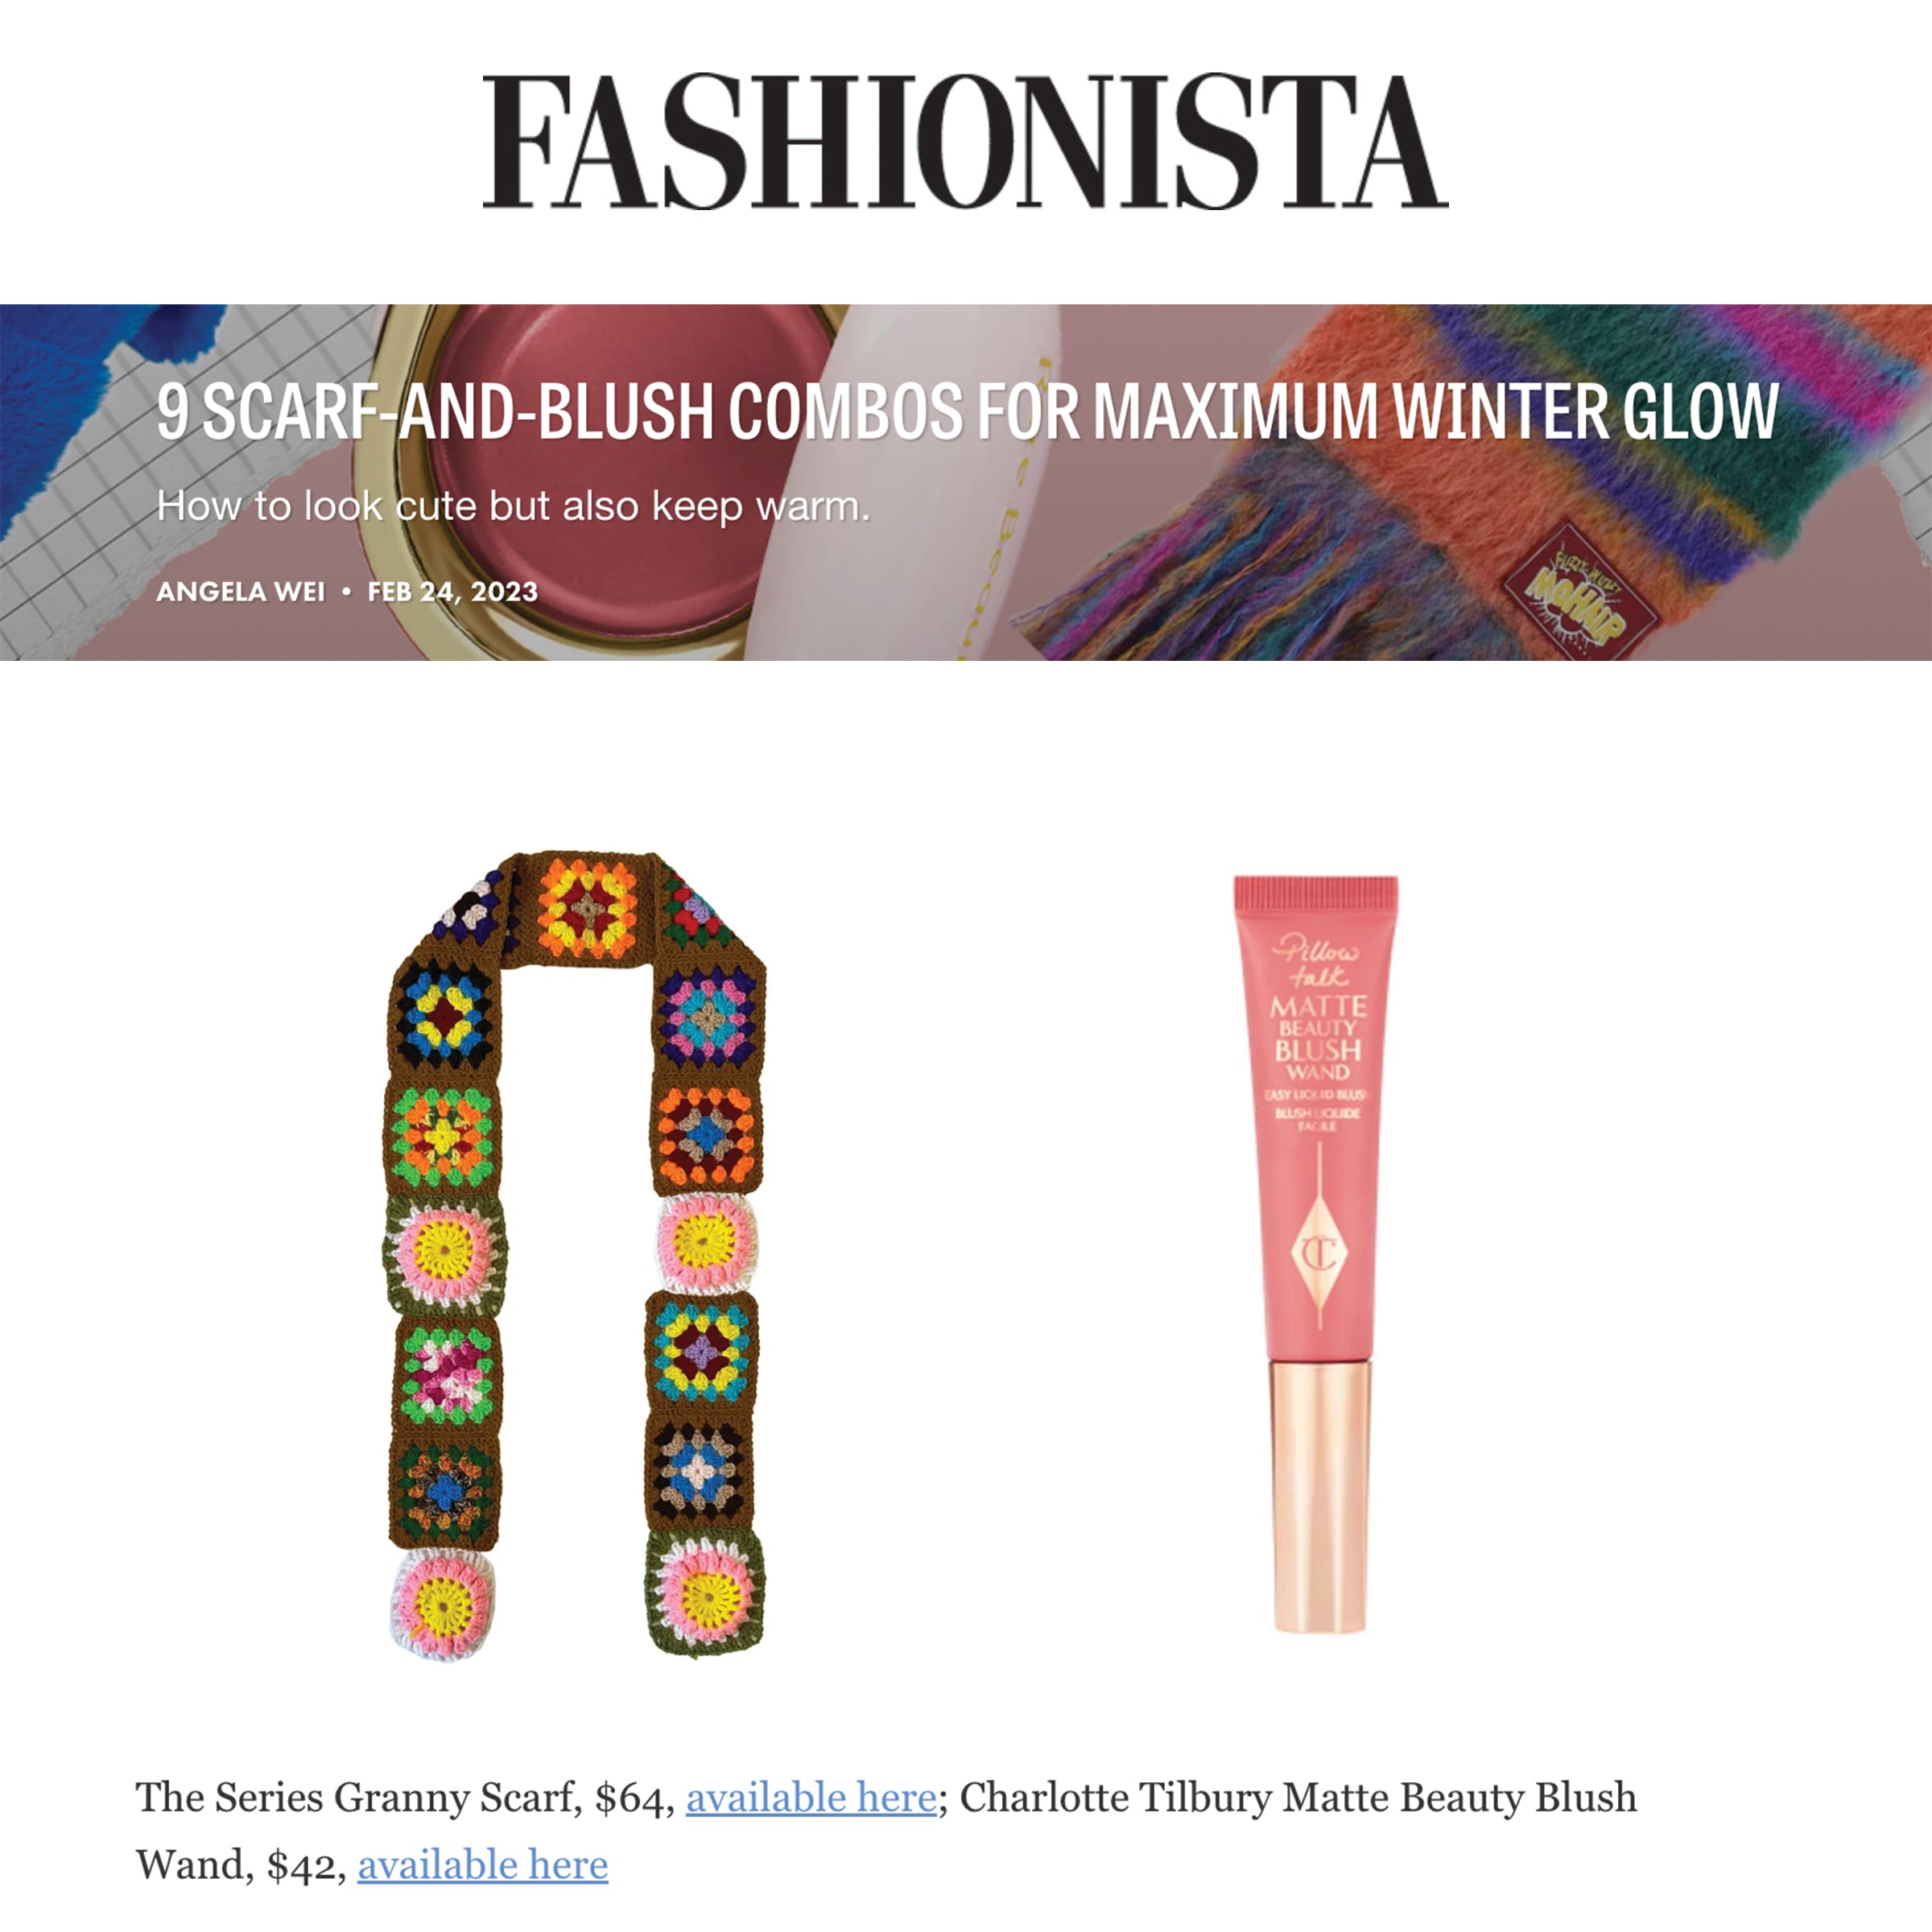 FASHIONISTA | SCARF-AND-BLUSH COMBOS FOR MAXIMUM WINTER GLOW